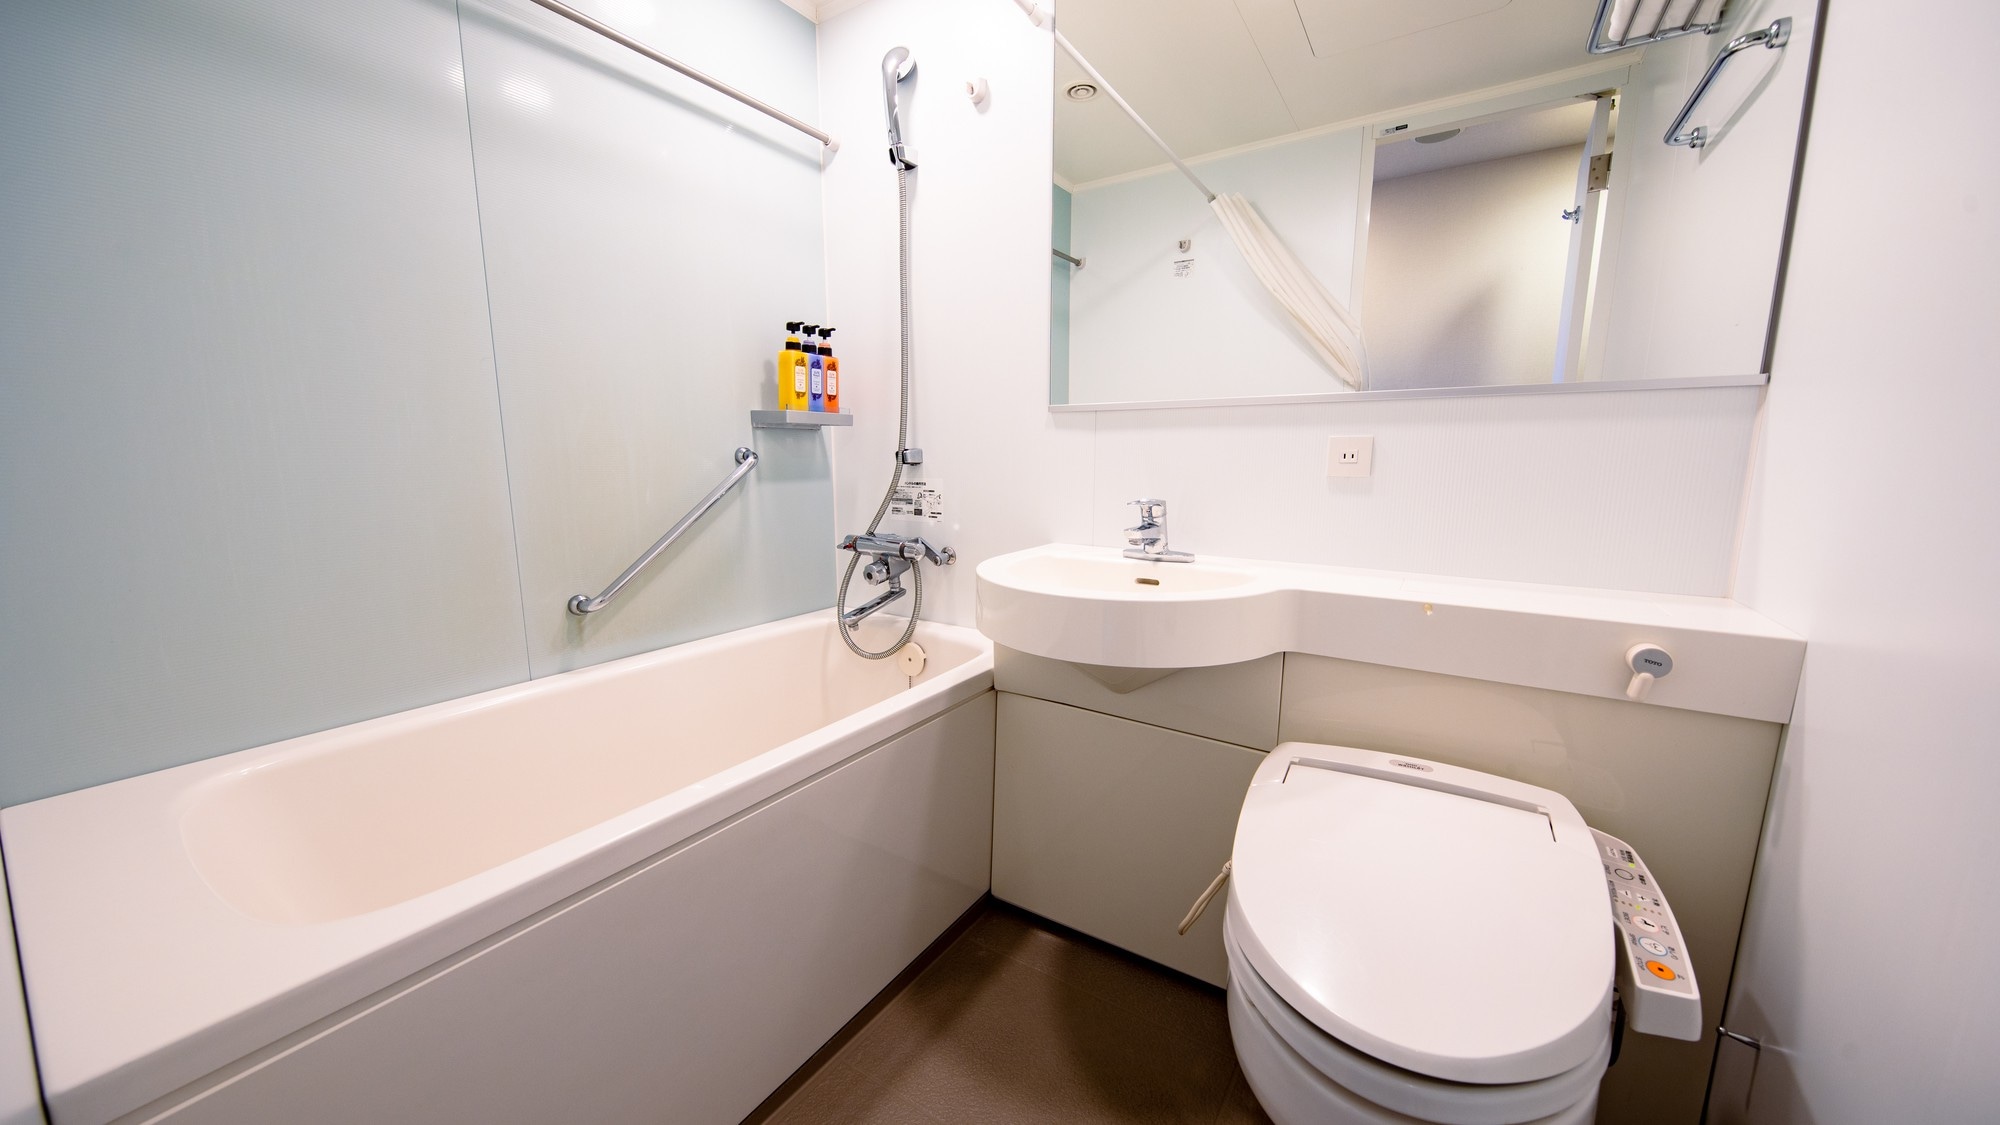 The bathtub is a little wider and you can stretch your legs comfortably.